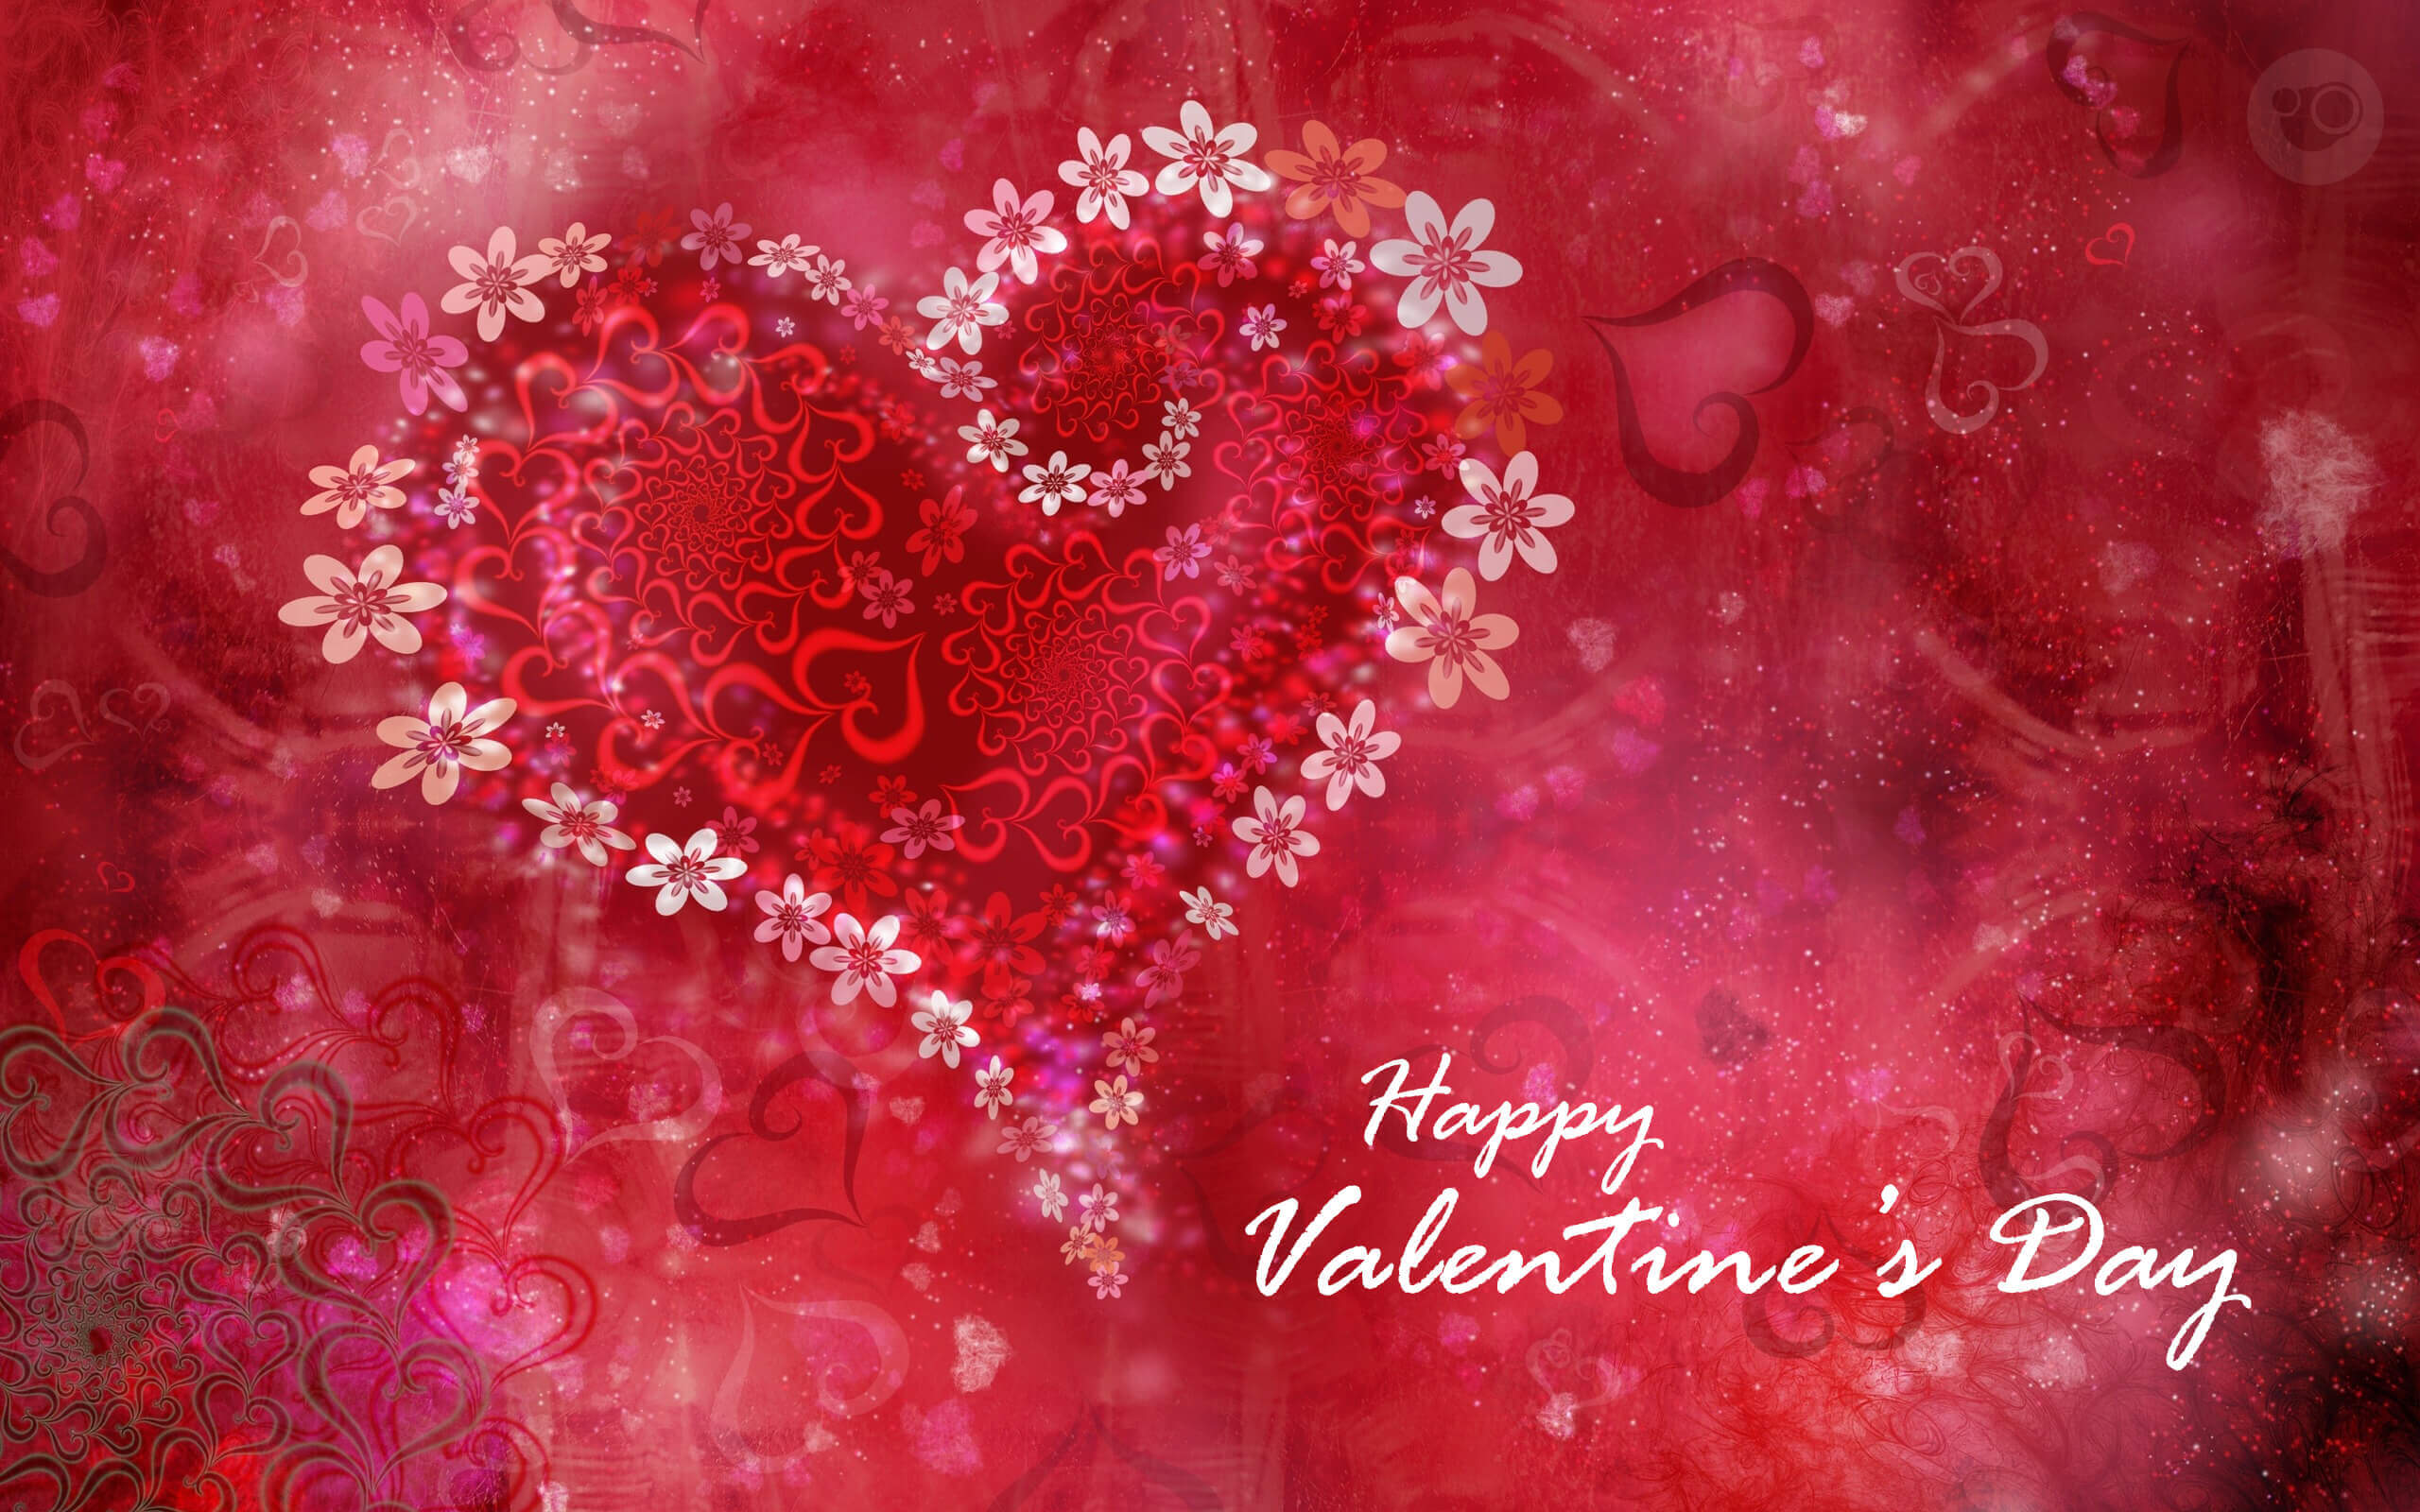 Happy Valentines Day HD Wallpapers Backgrounds Pictures CGfrog